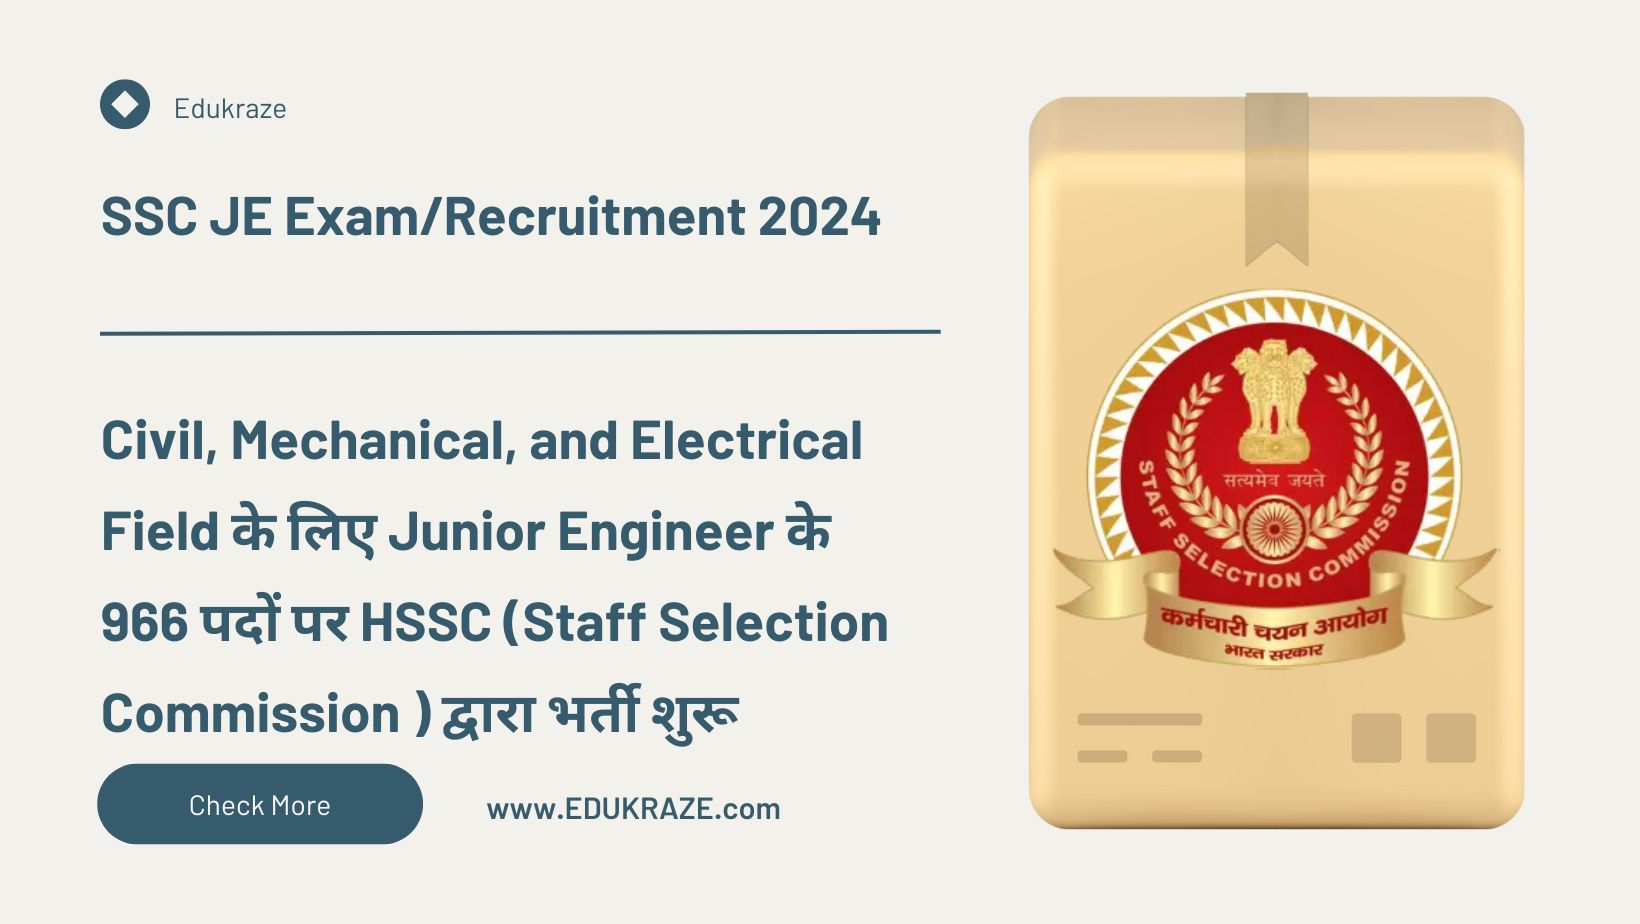 SSC JE Exam 2024 with Detailed Notification and links